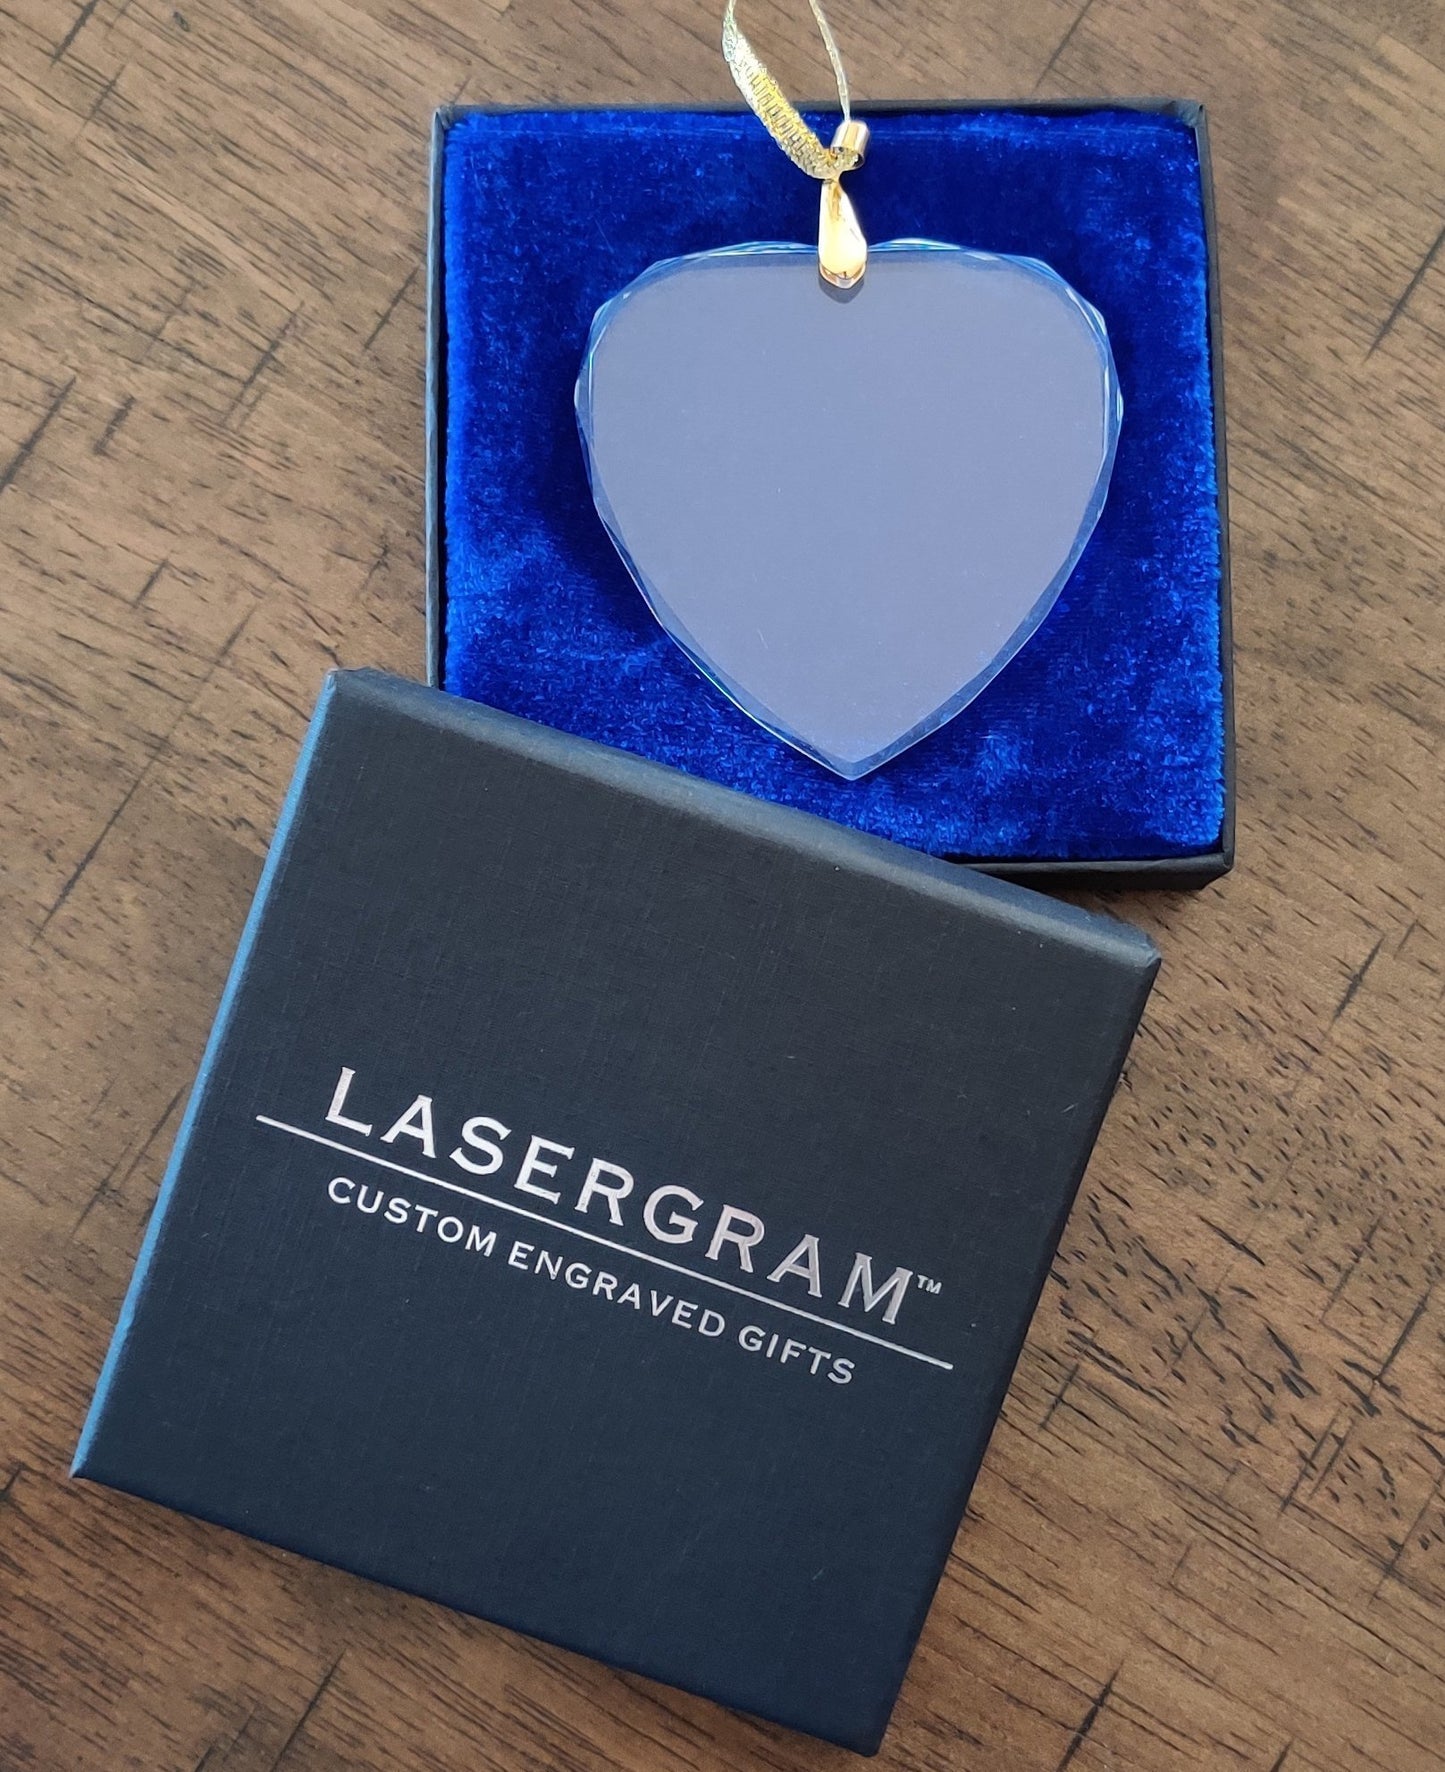 LaserGram Christmas Ornament, Zodiac Sign Leo, Personalized Engraving Included (Heart Shape)